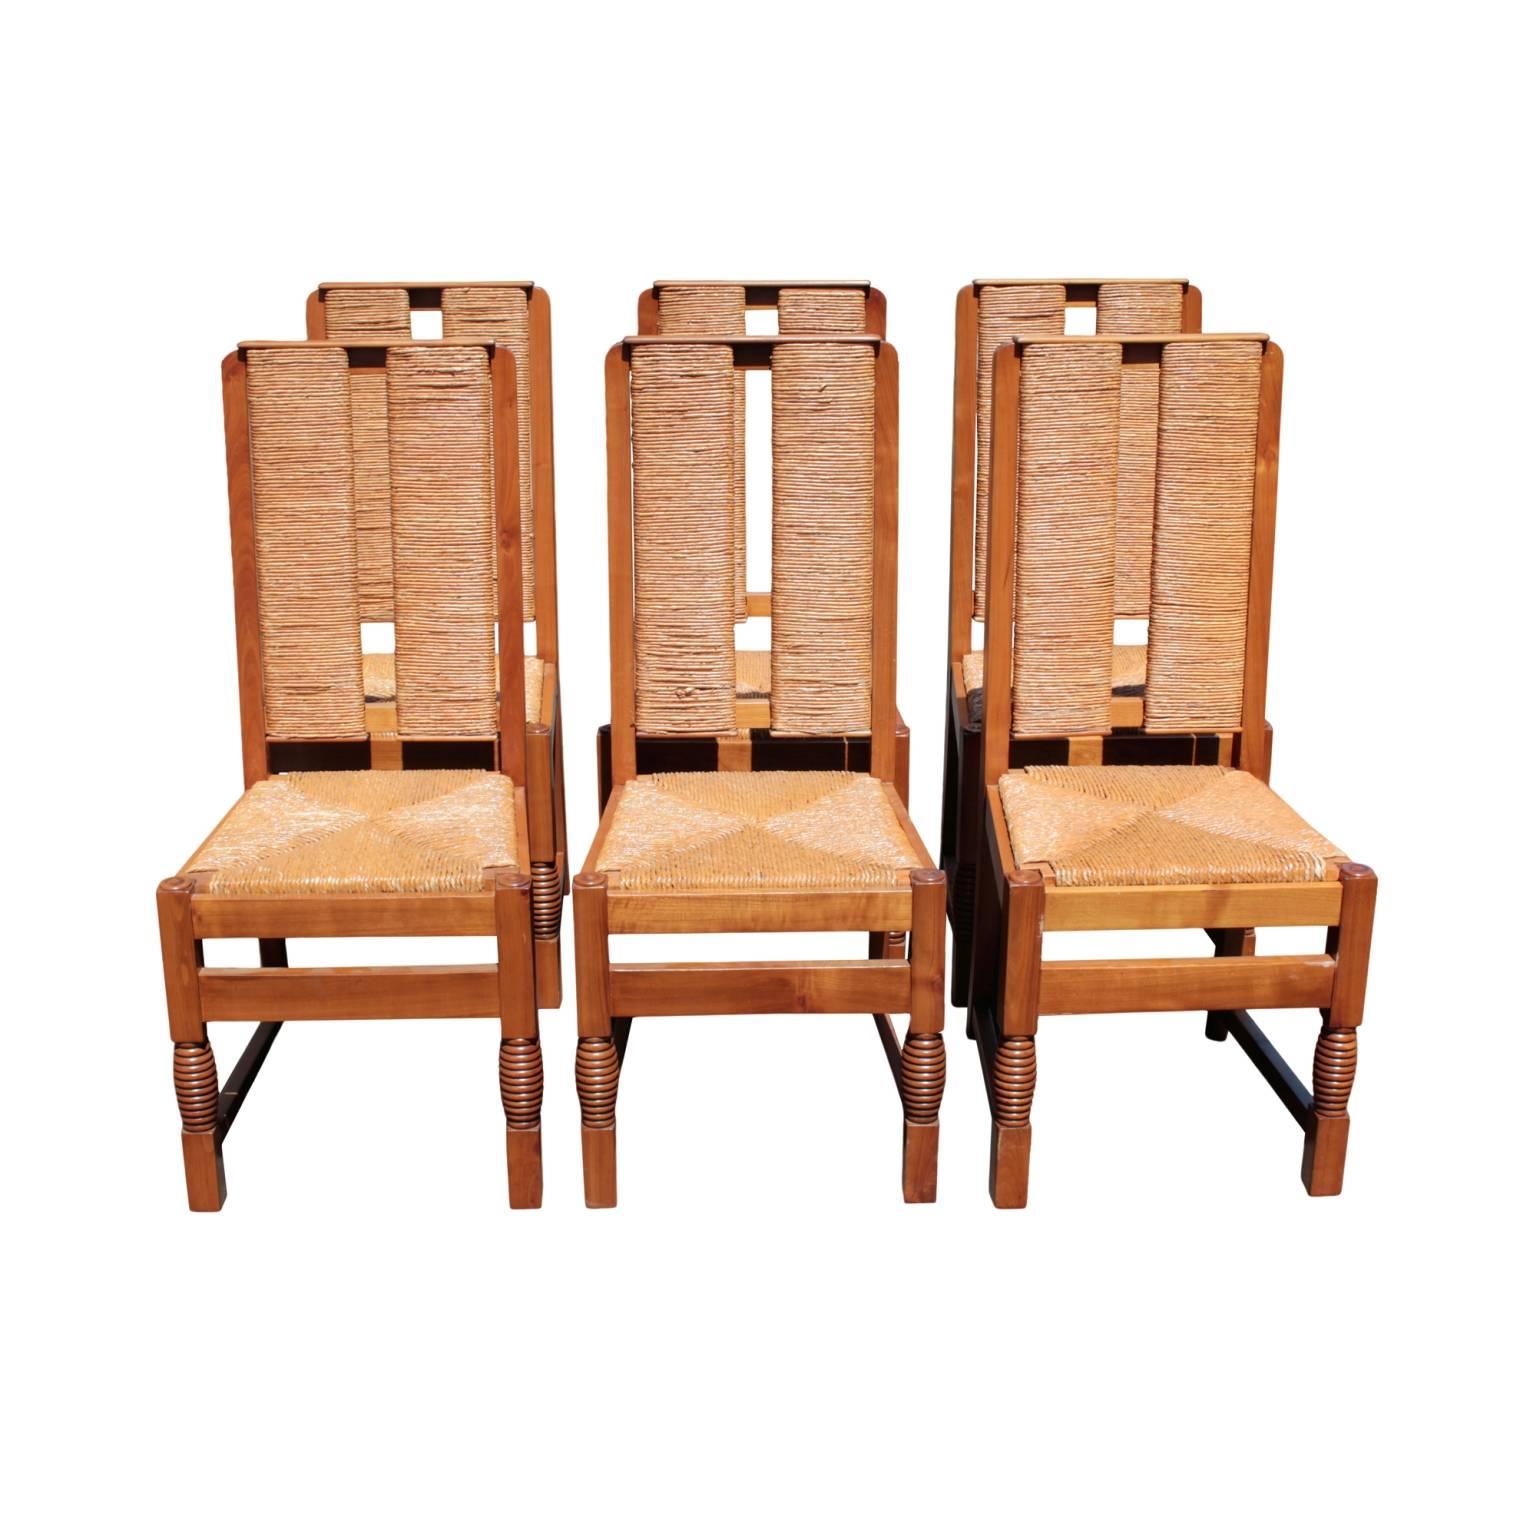 Art Moderne set of sculpted chairs belonging to the table Combray Gallery ref# CT11 designed by Victor Courtray (1896-1987). Backs and seats with weaved rush. In cherry. Biarritz, France. 